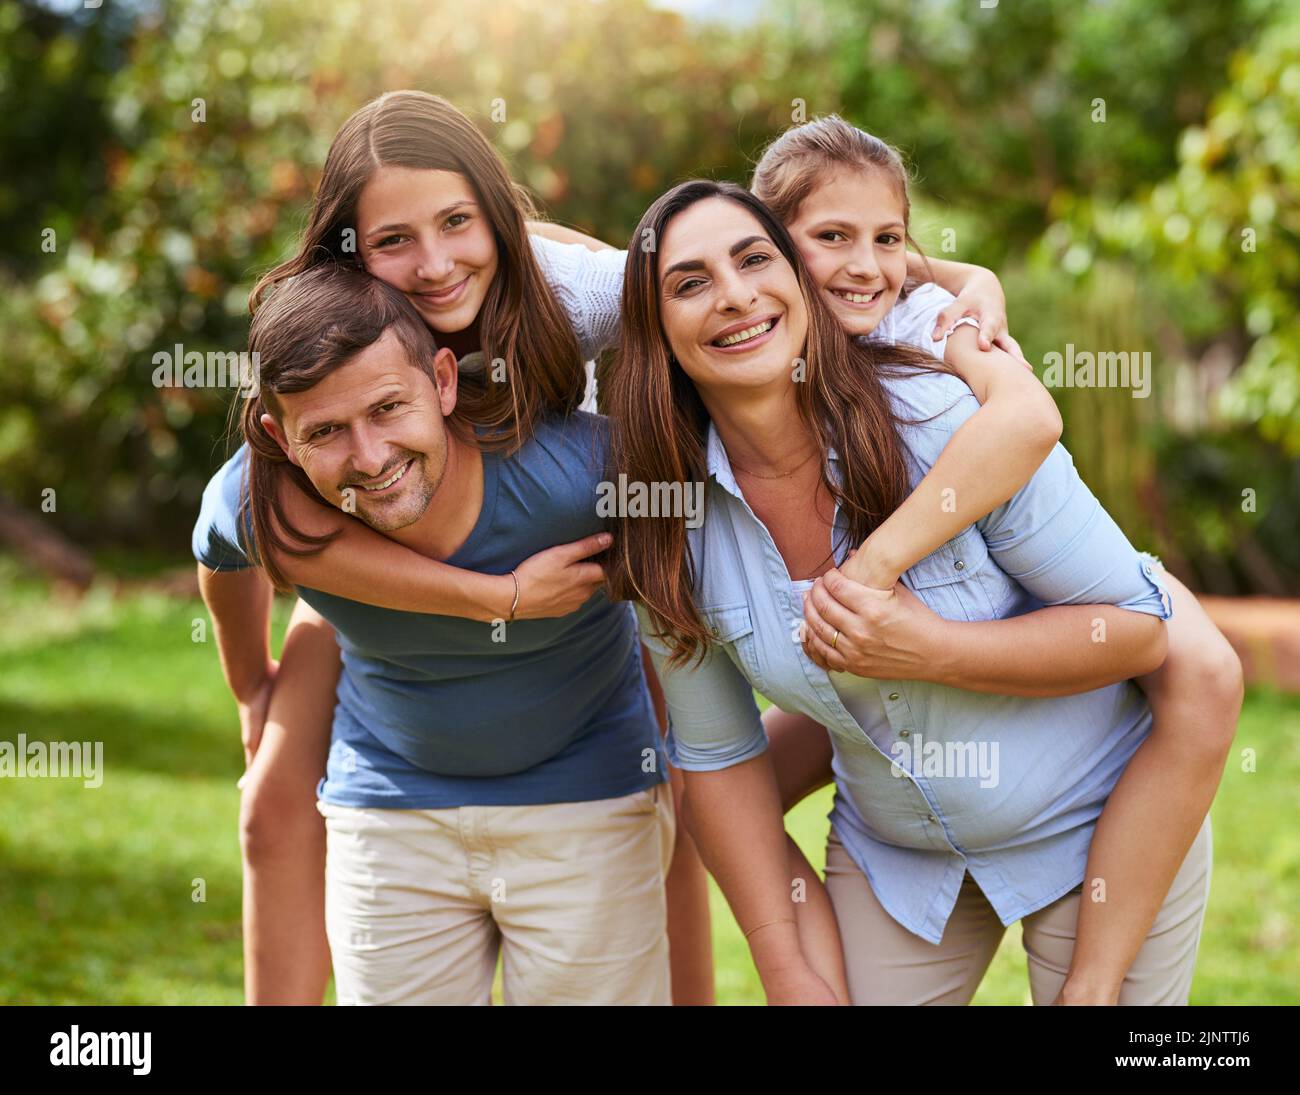 Lets take a ride. Portrait of a cheerful young mother and father giving their daughters a piggyback ride outside in a park during the day. Stock Photo